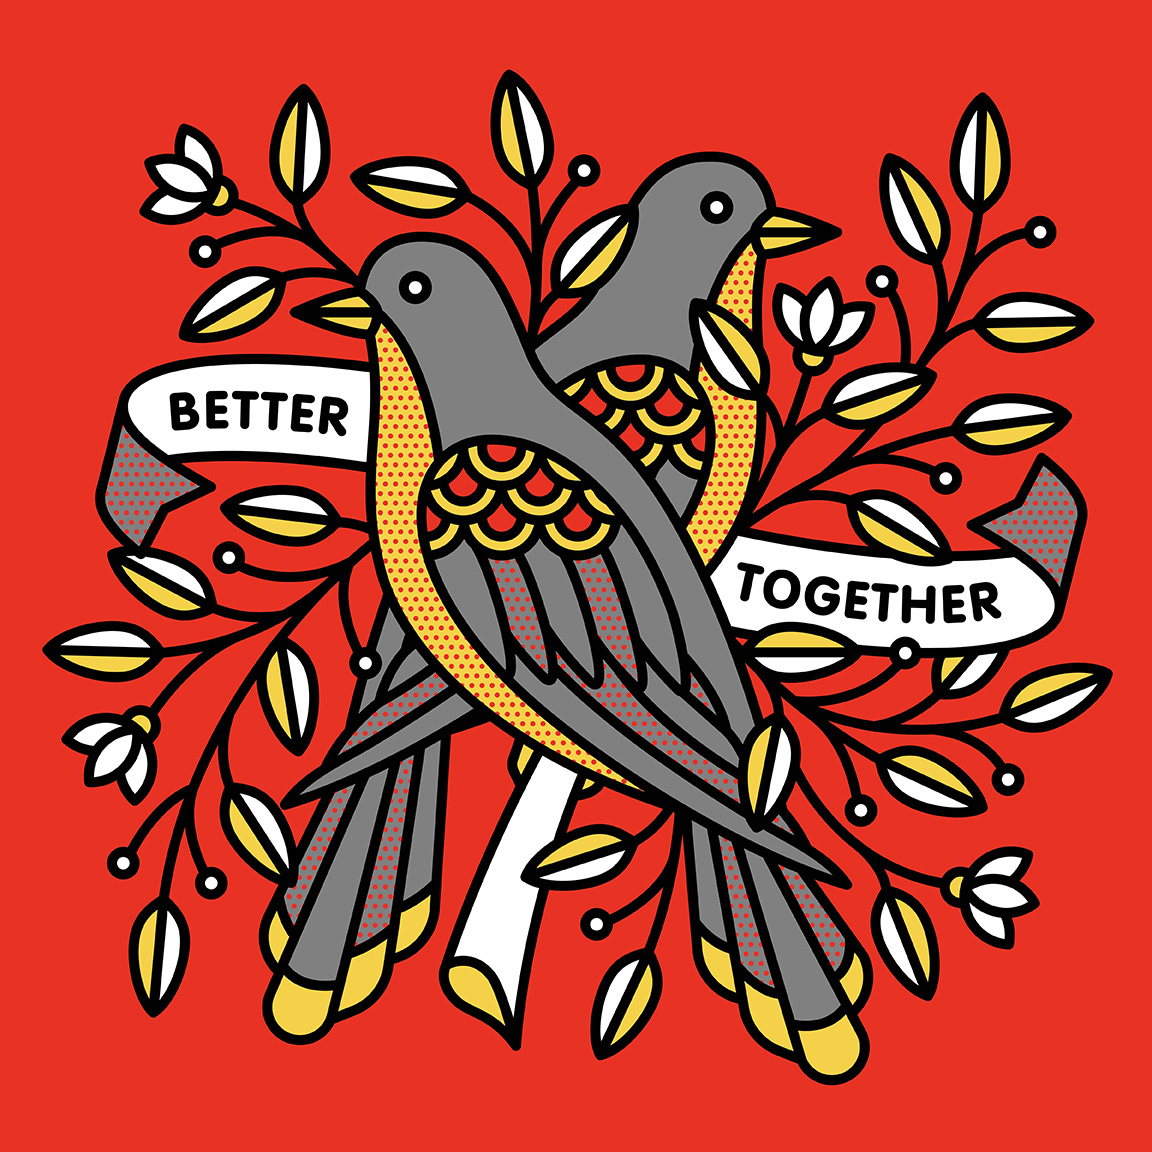 Made for OurPlanetWeek's prompt: Together. A literal interprepation, but  true that a healthier planet only happens when everyone works together. #ourplanetweek #letsdrawthechange